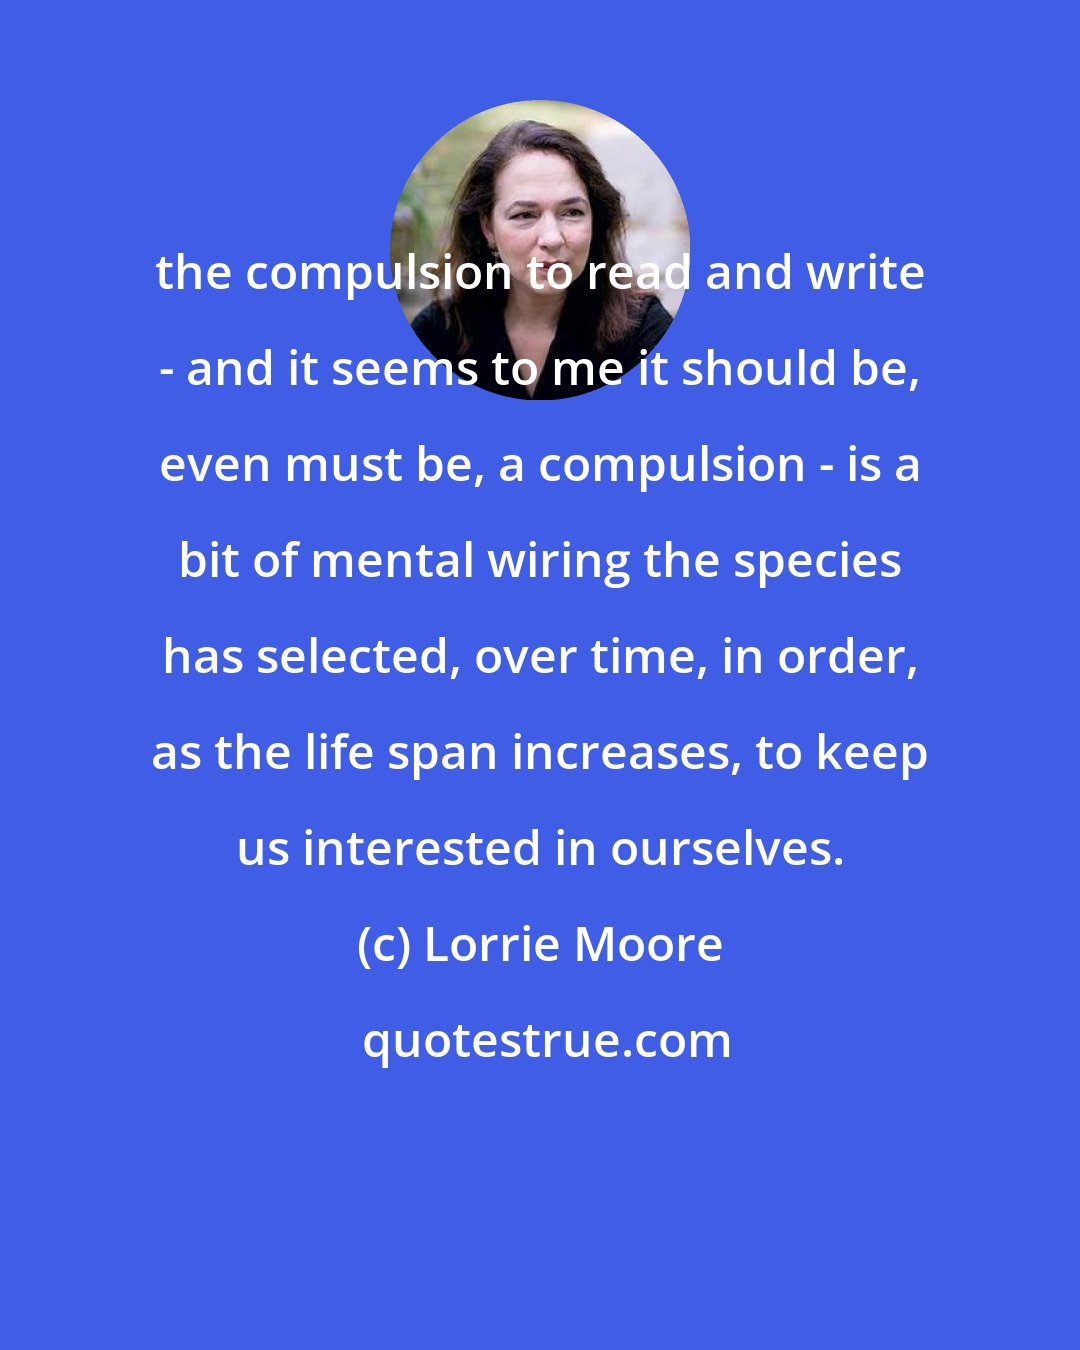 Lorrie Moore: the compulsion to read and write - and it seems to me it should be, even must be, a compulsion - is a bit of mental wiring the species has selected, over time, in order, as the life span increases, to keep us interested in ourselves.